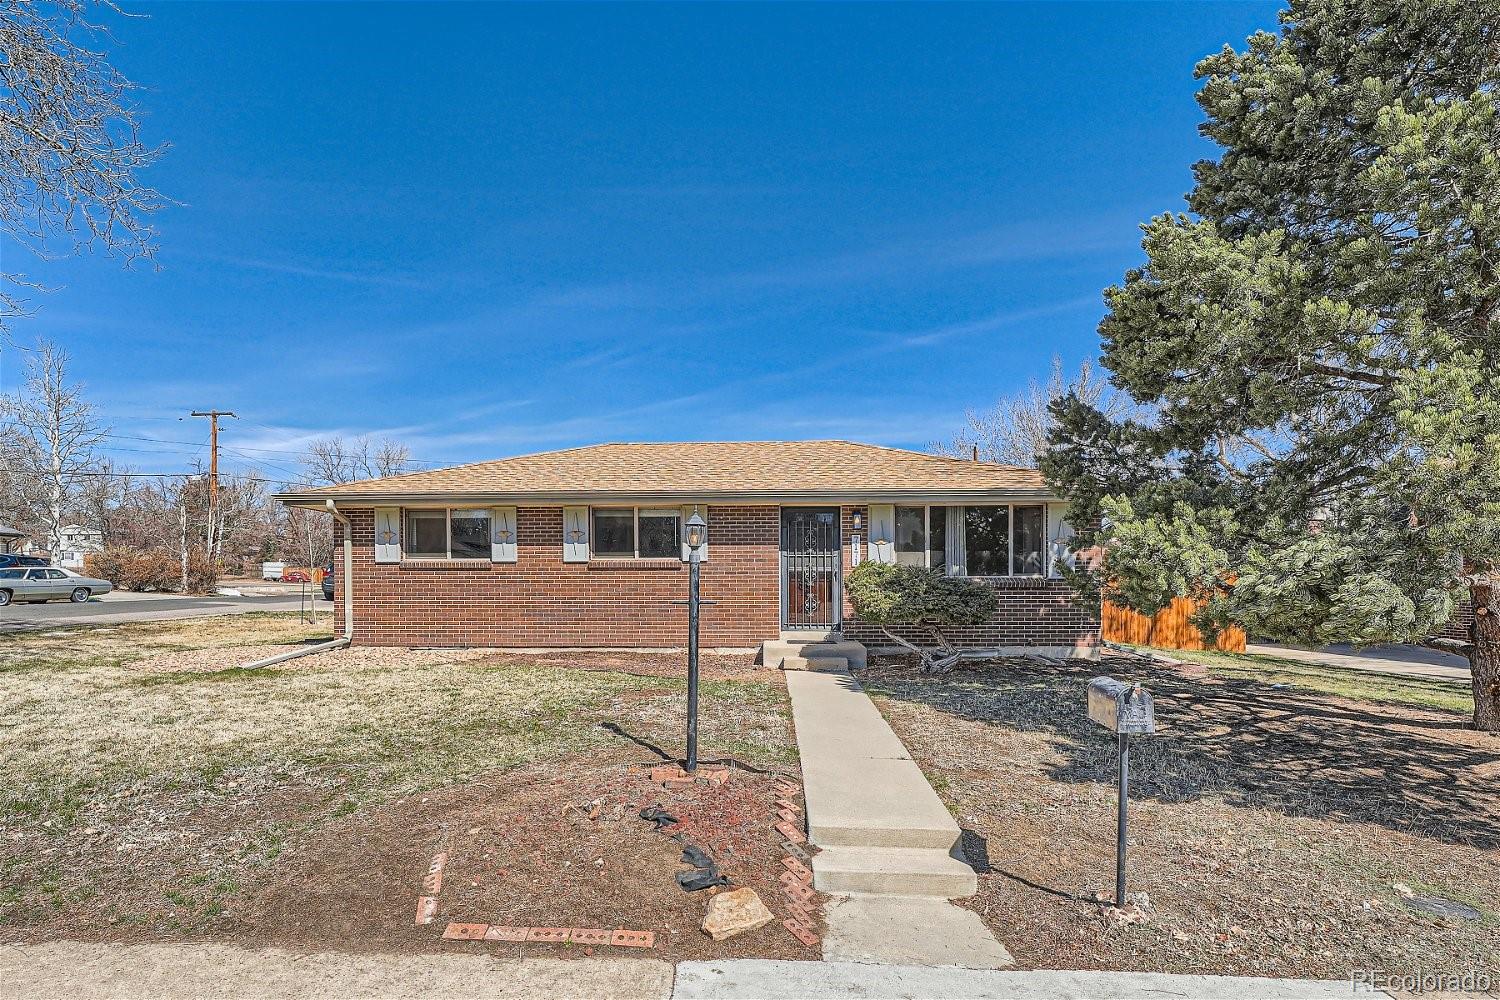 7171 W 75th Place, arvada MLS: 4881704 Beds: 4 Baths: 2 Price: $600,000